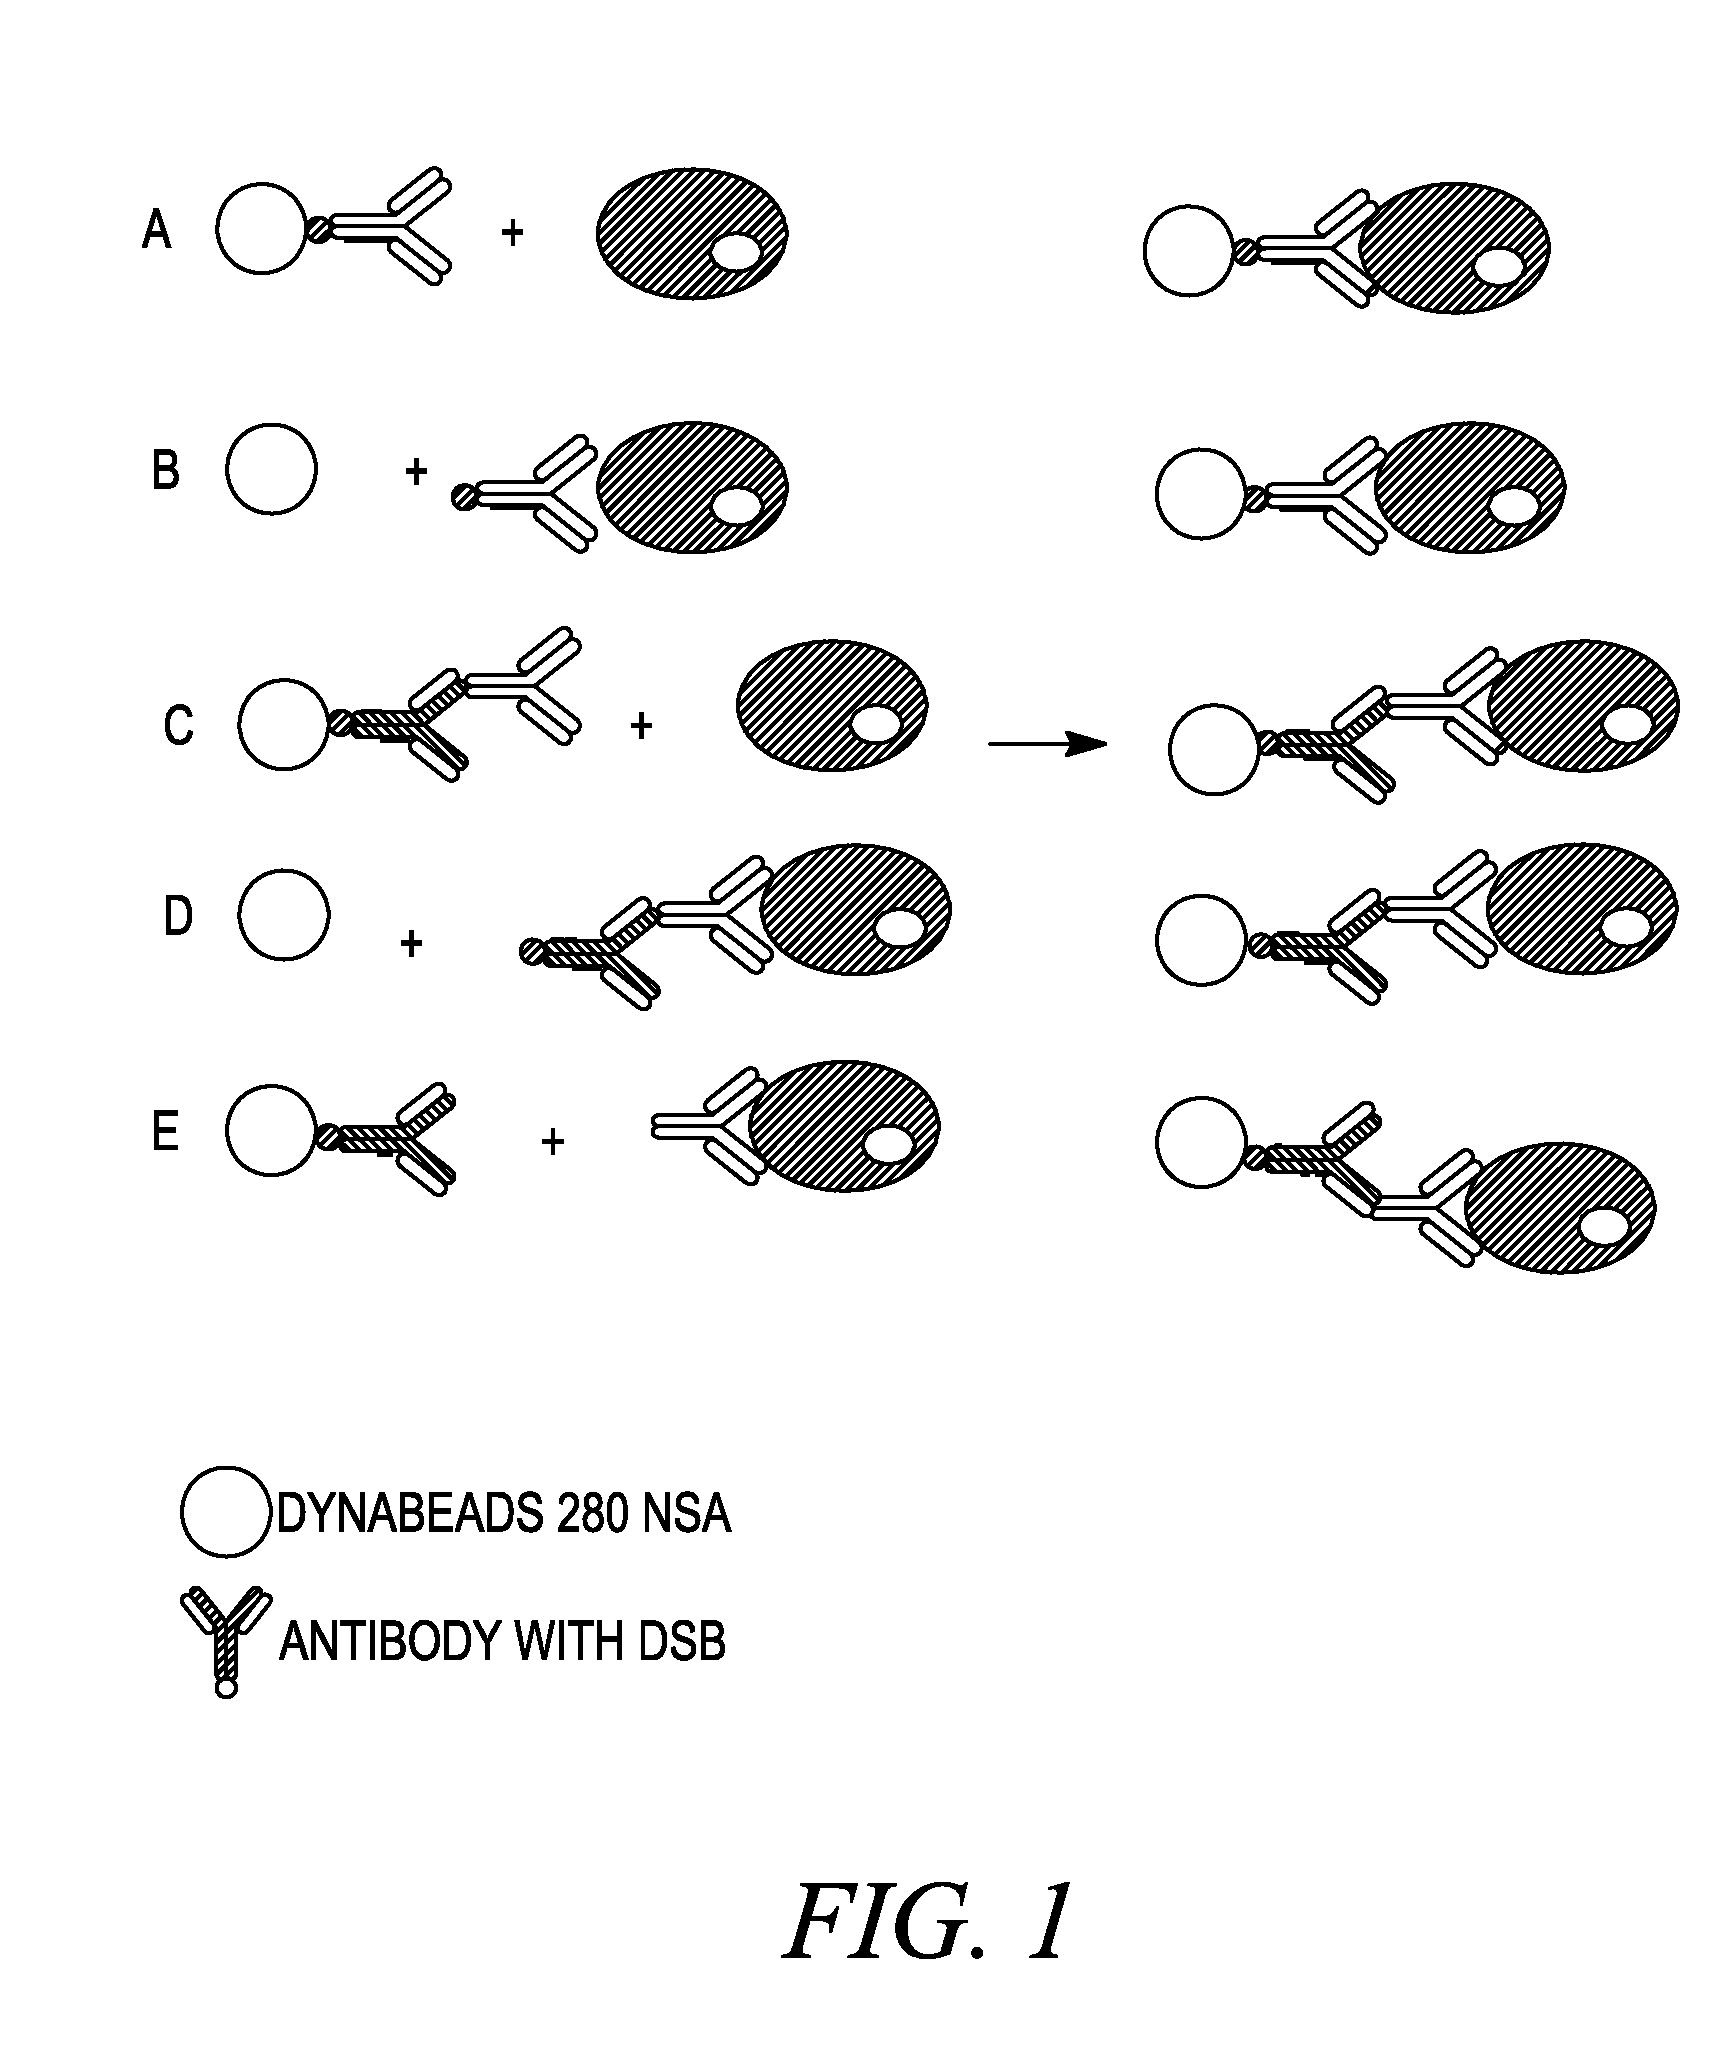 Methods of reversibly binding a biotin compound to a support